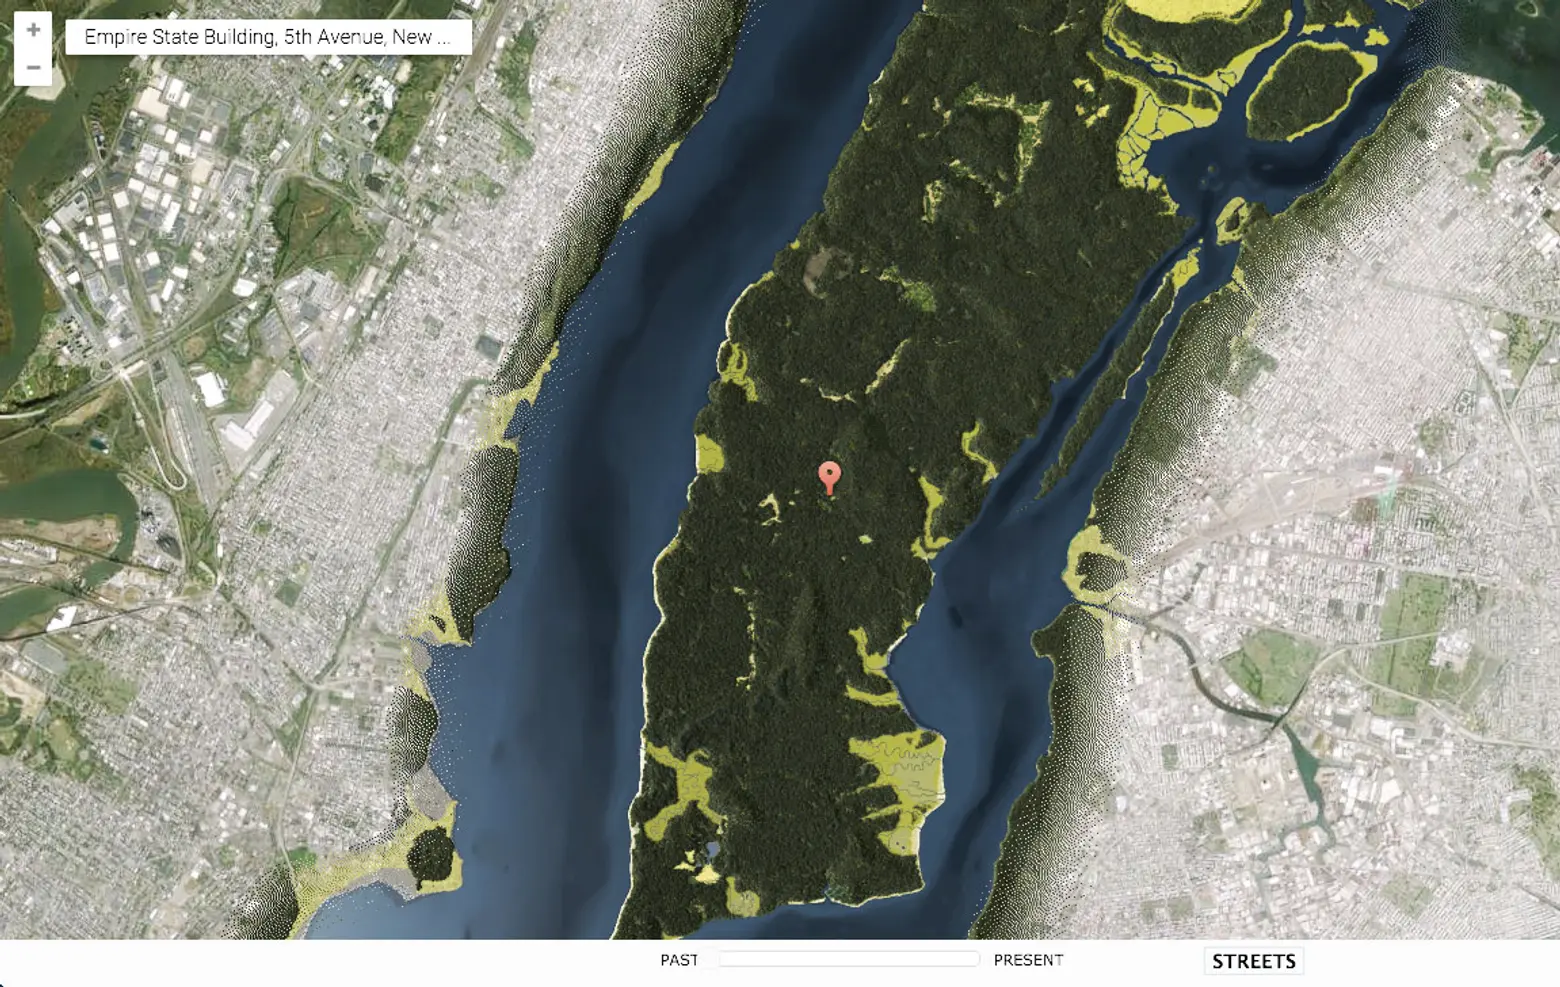 Explore Manhattan When It Was Just Forests and Creeks With the 1609 Welikia Map